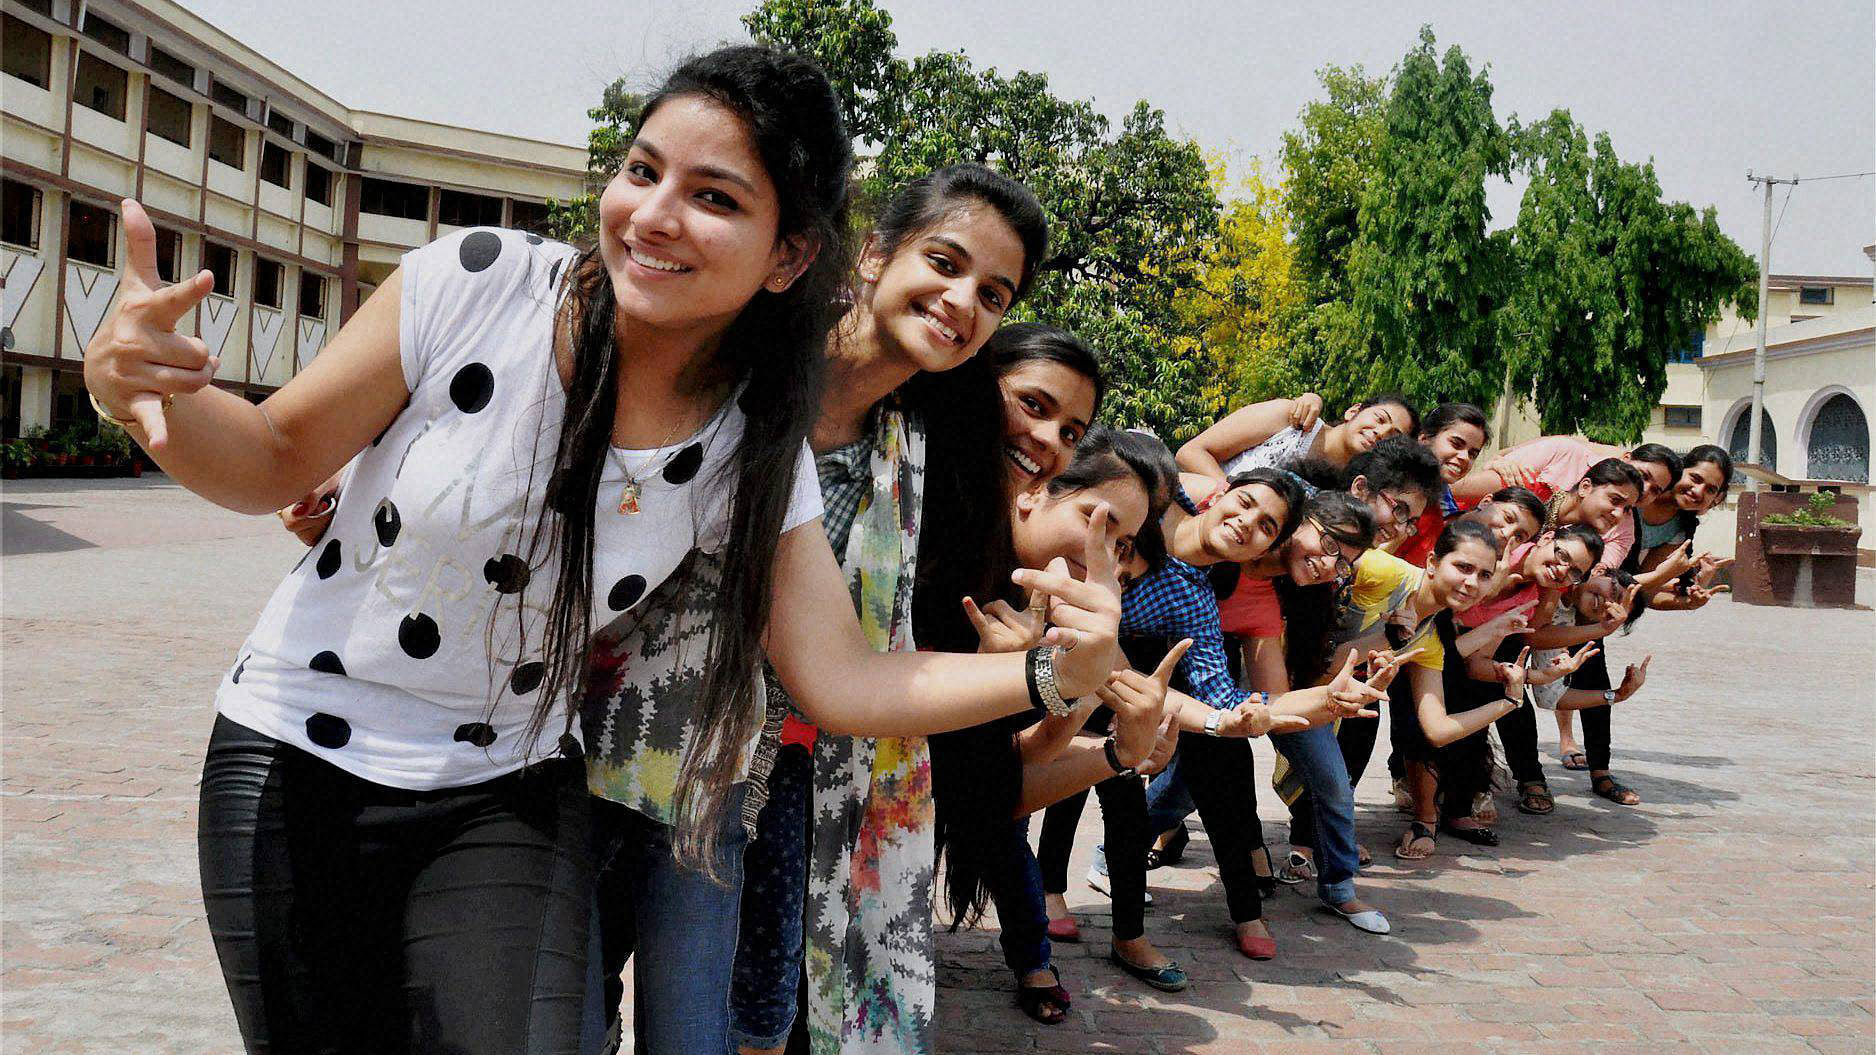 Students celebrating their success after the results of an examination.&nbsp;